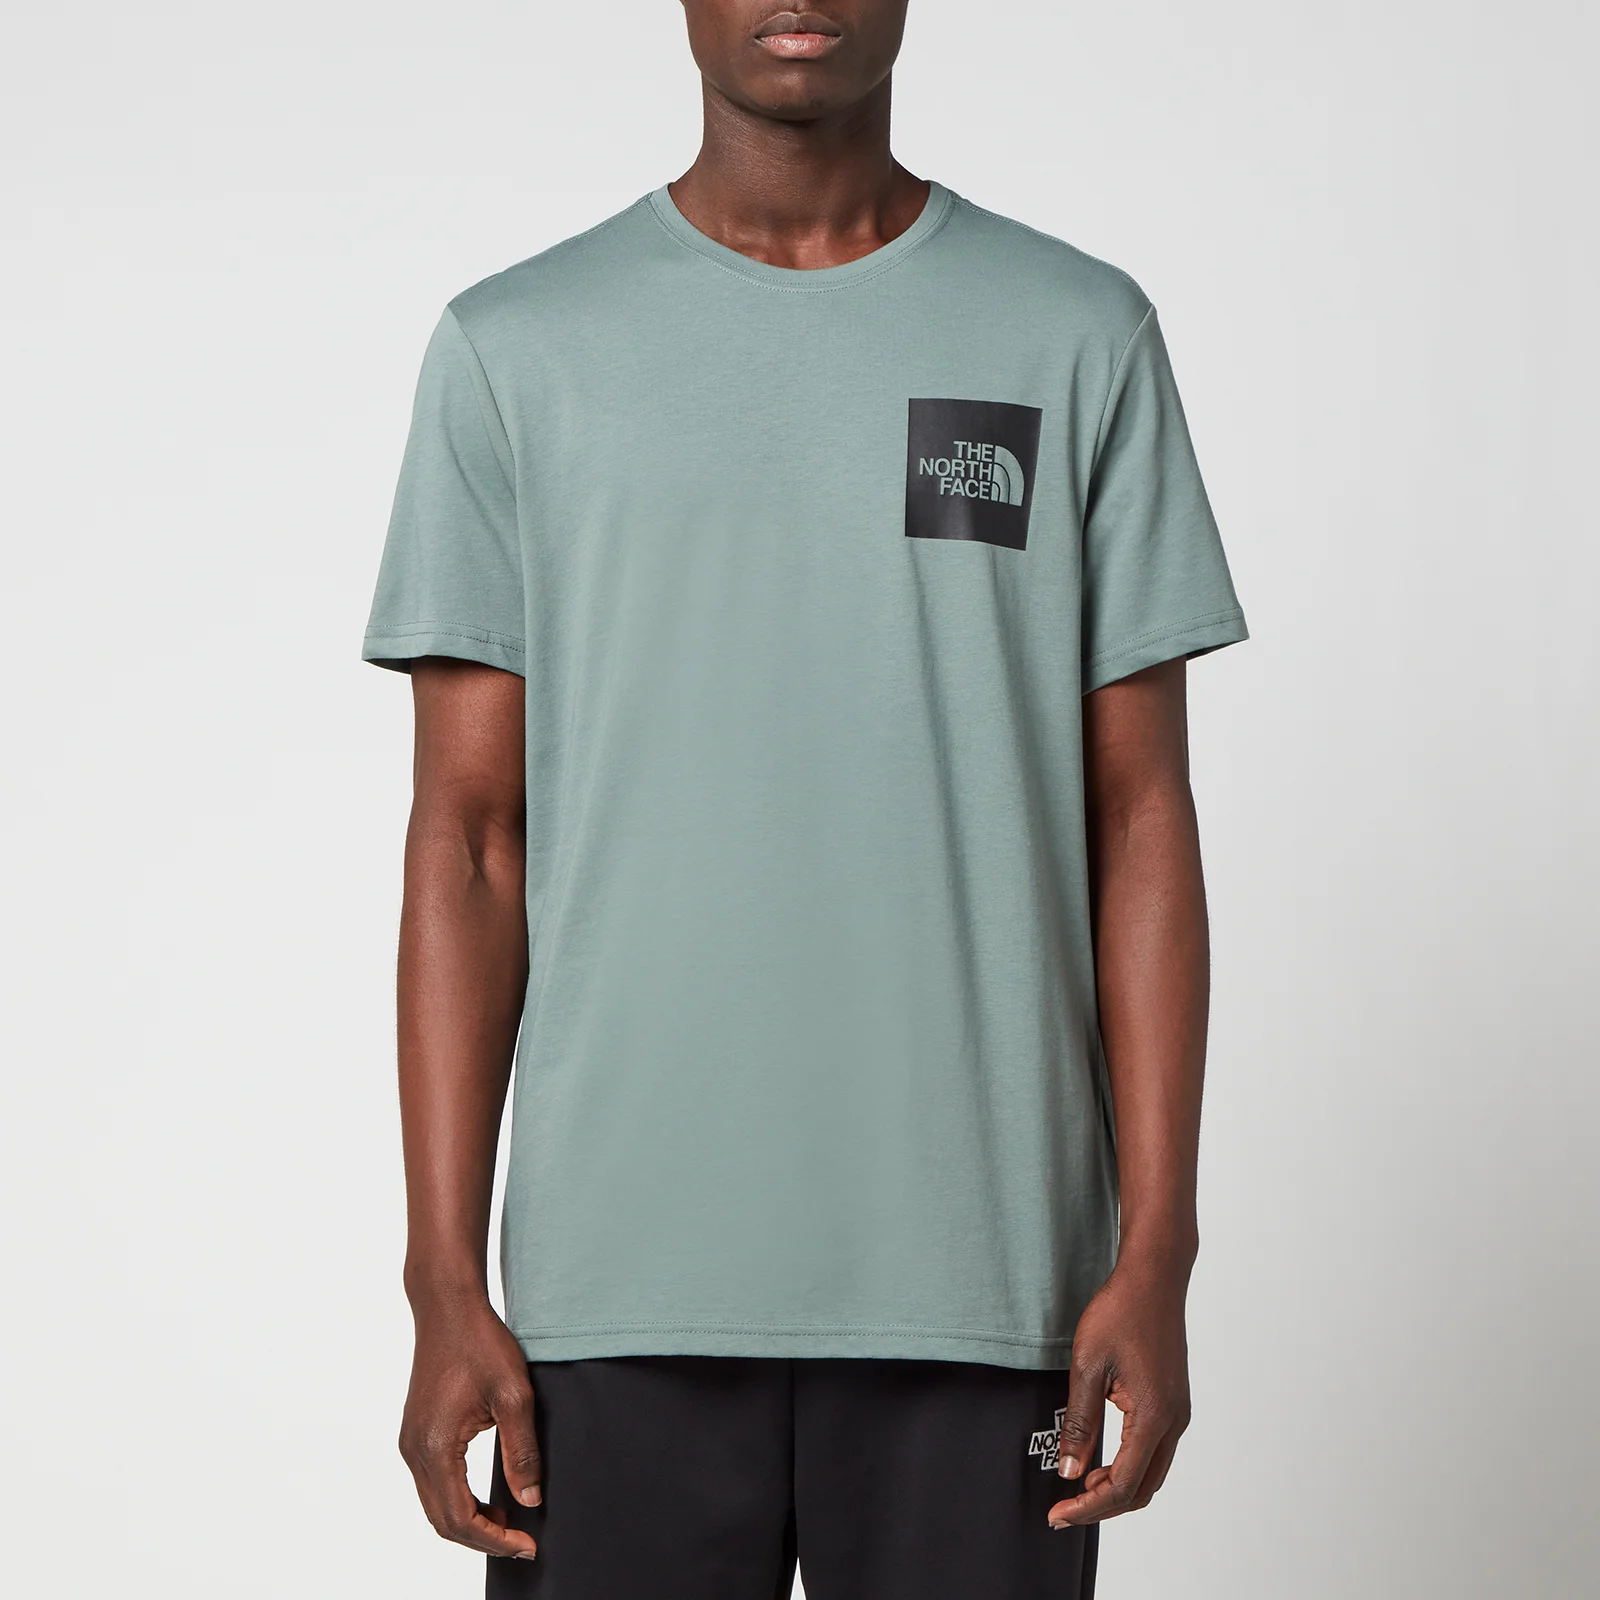 The North Face Men's Fine T-Shirt - Balsam Green Image 1